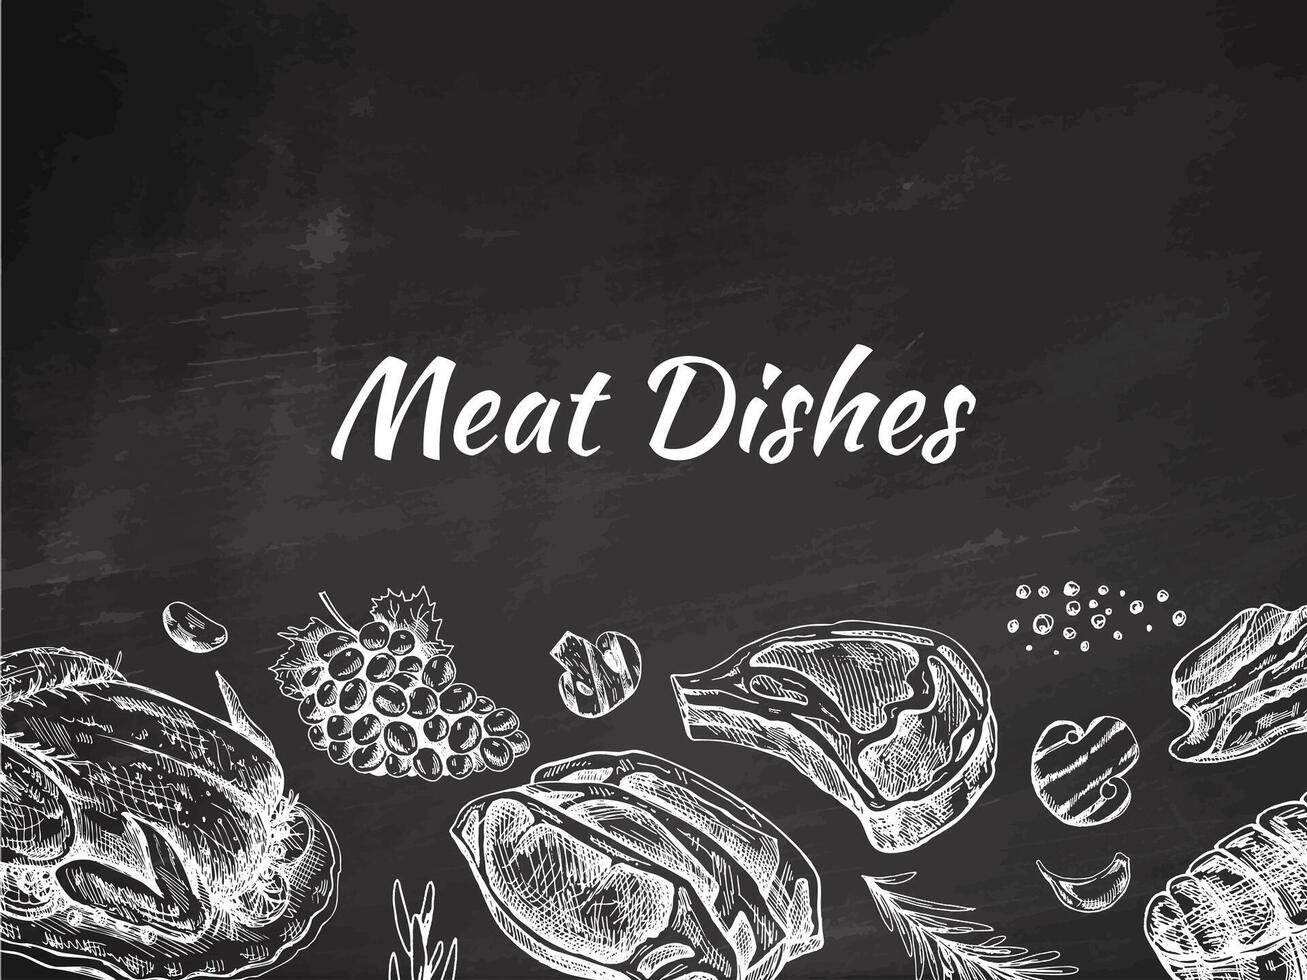 Meat and vegetables menu template in engraved vintage style. Hand-drawn sketches of barbecue meat pieces with herbs and seasonings on chalkboard background. vector